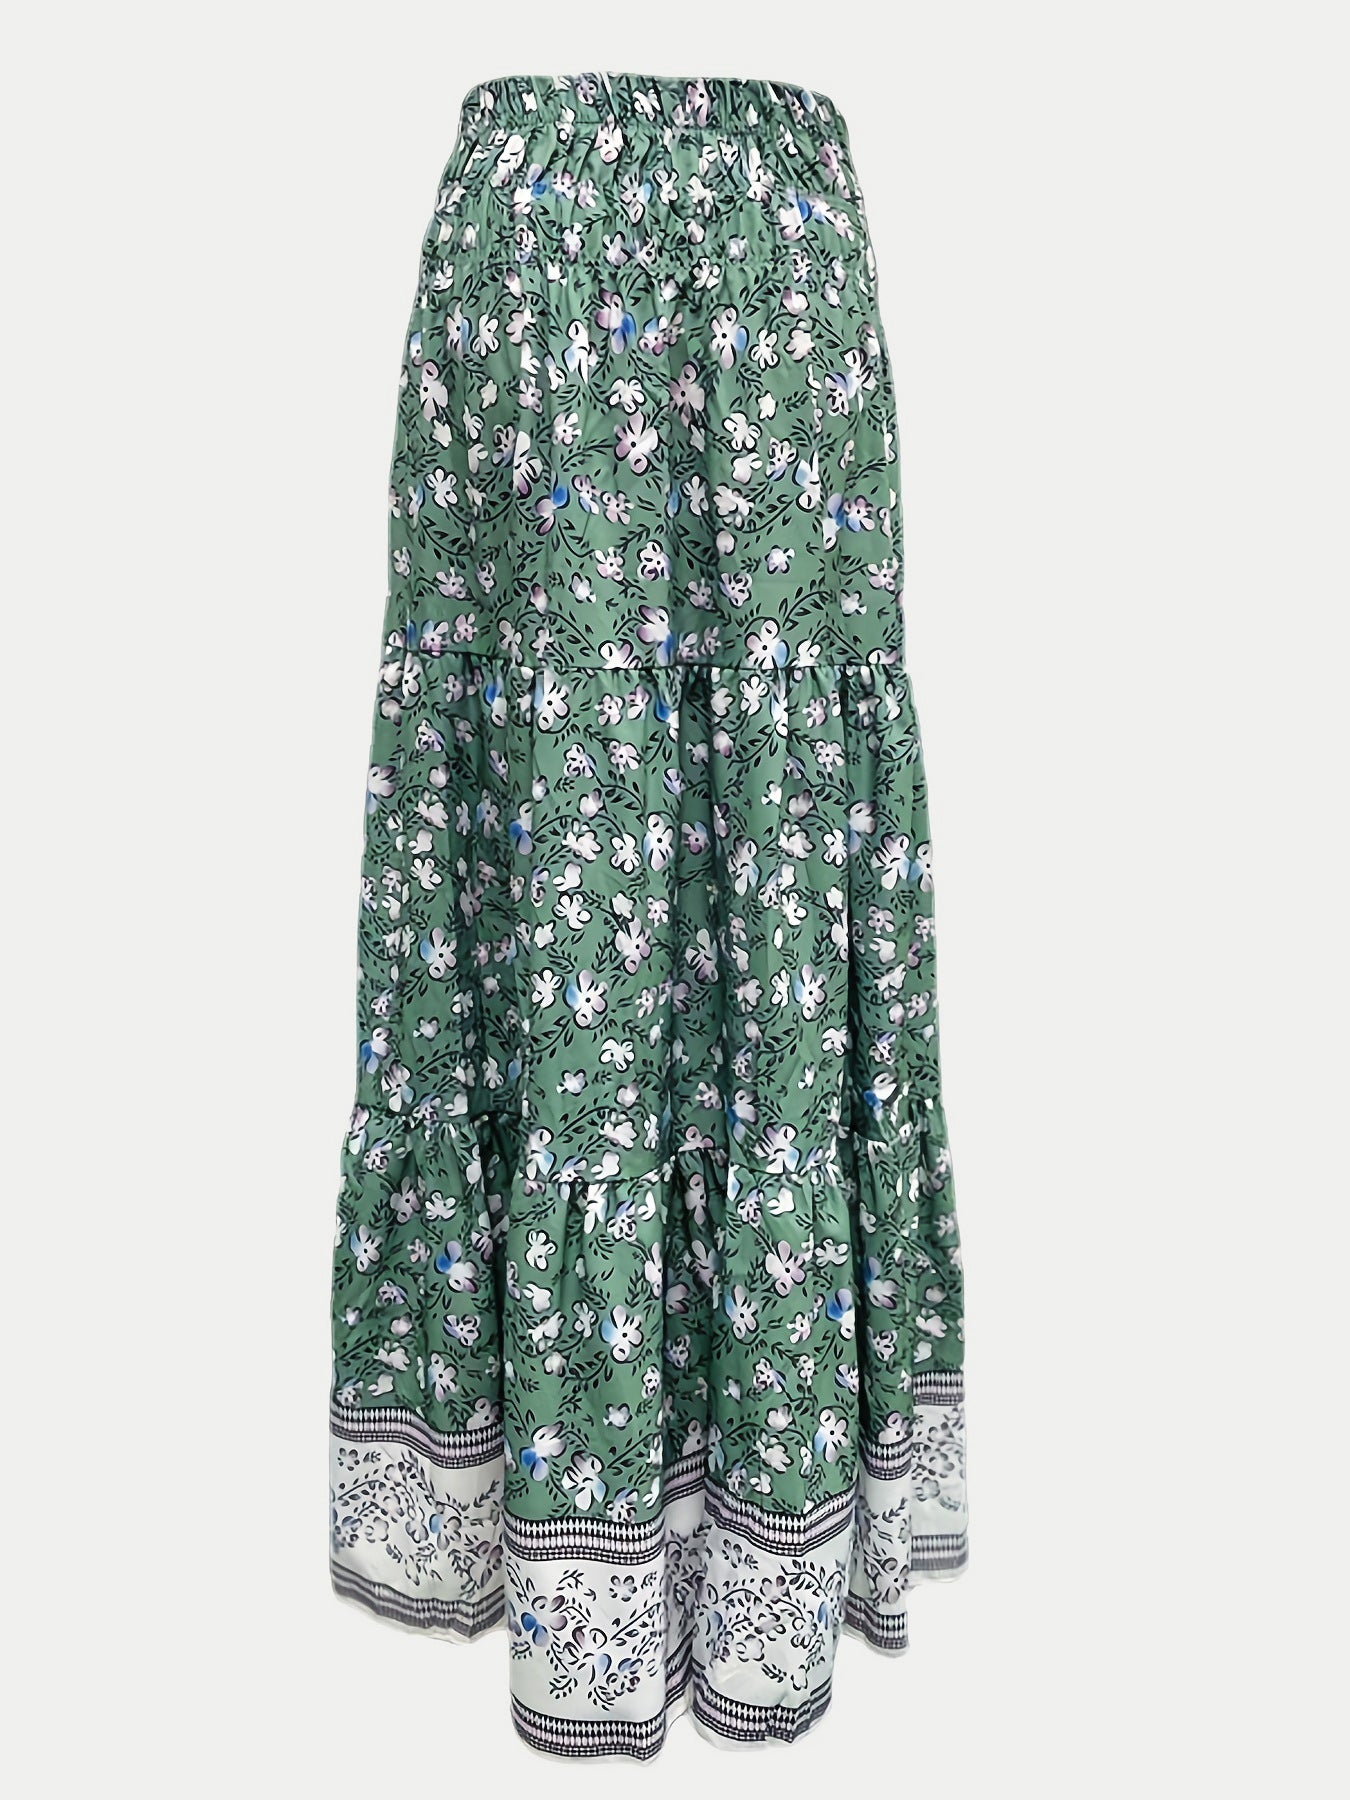 Green tiered boho skirt with floral print